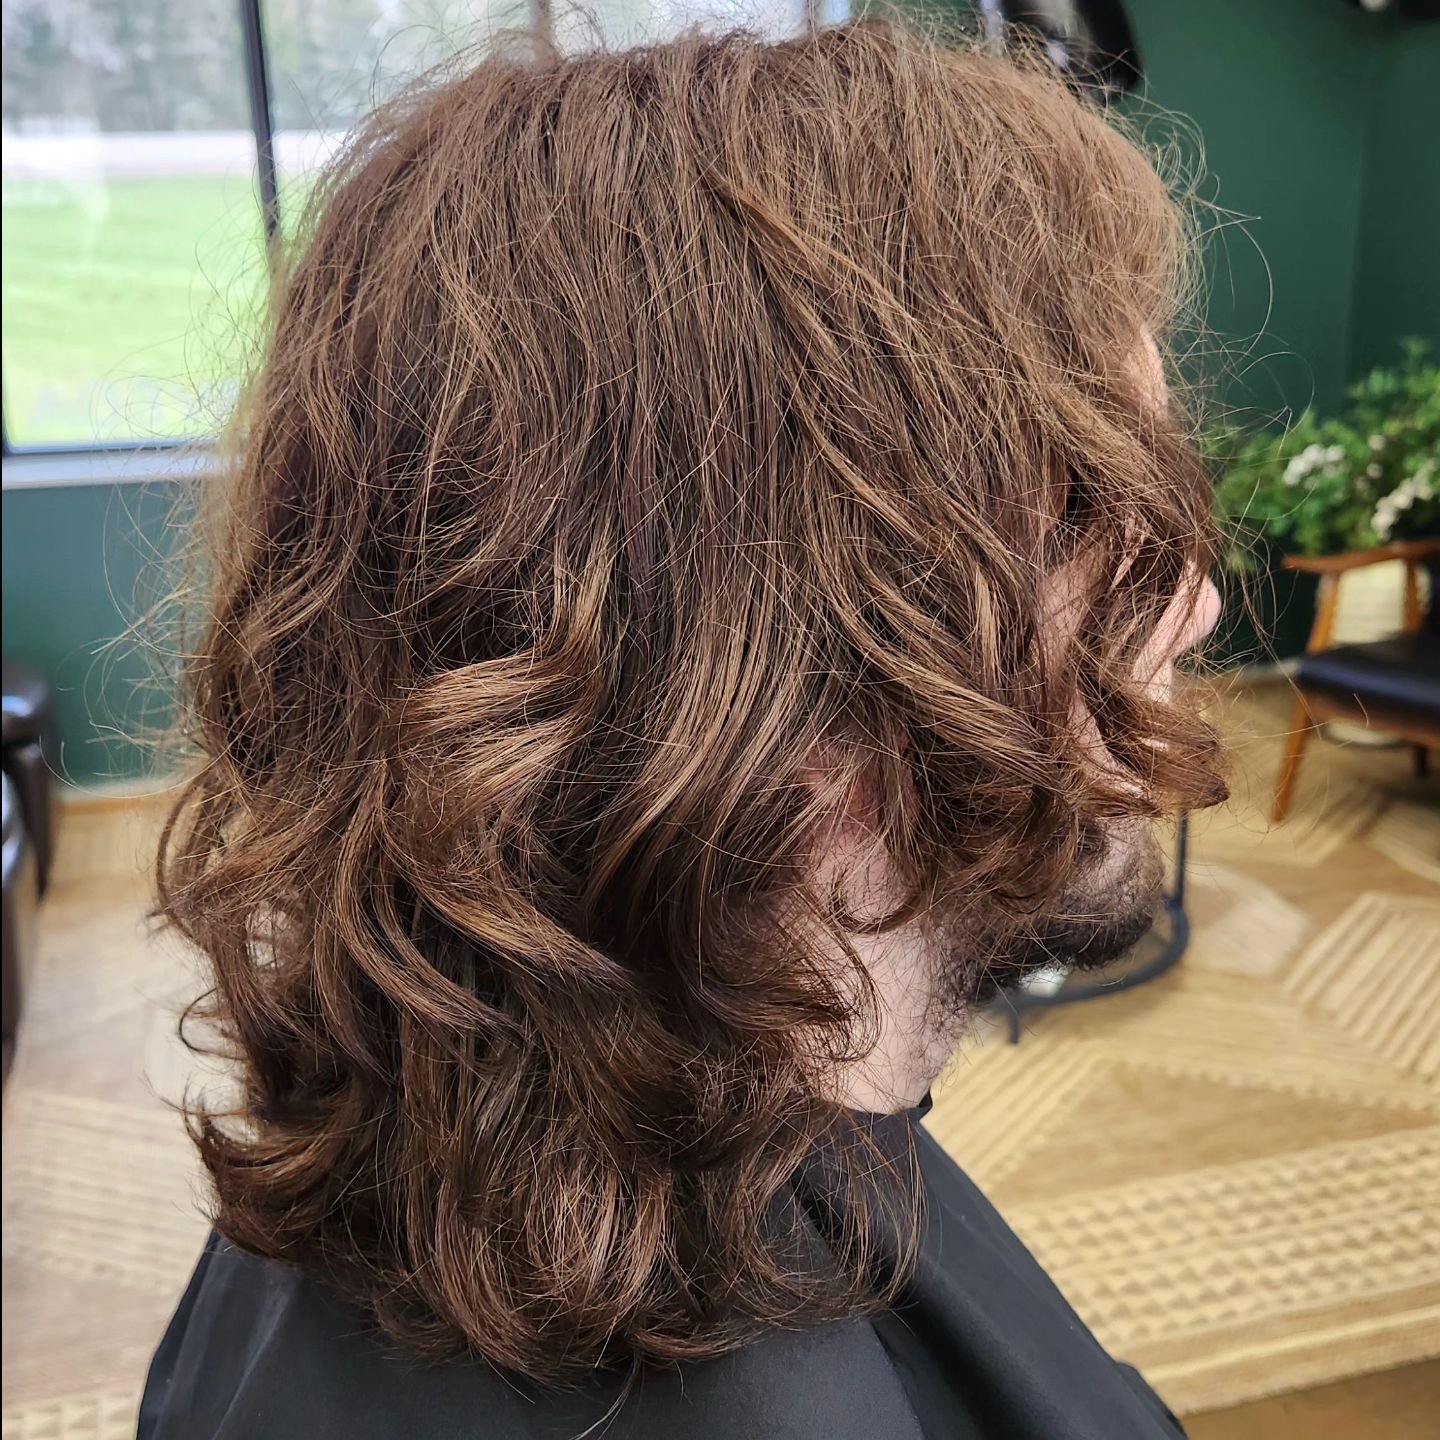 Summer is coming! 🌞 
Our client wanted a very big change!! It was time to shorten up his hair for some summer fun! 
Styled by @meaganellis21 

#menshair #menscuts #mensstyle #hair #hairsalon #hairstylistlife #mn #chisago